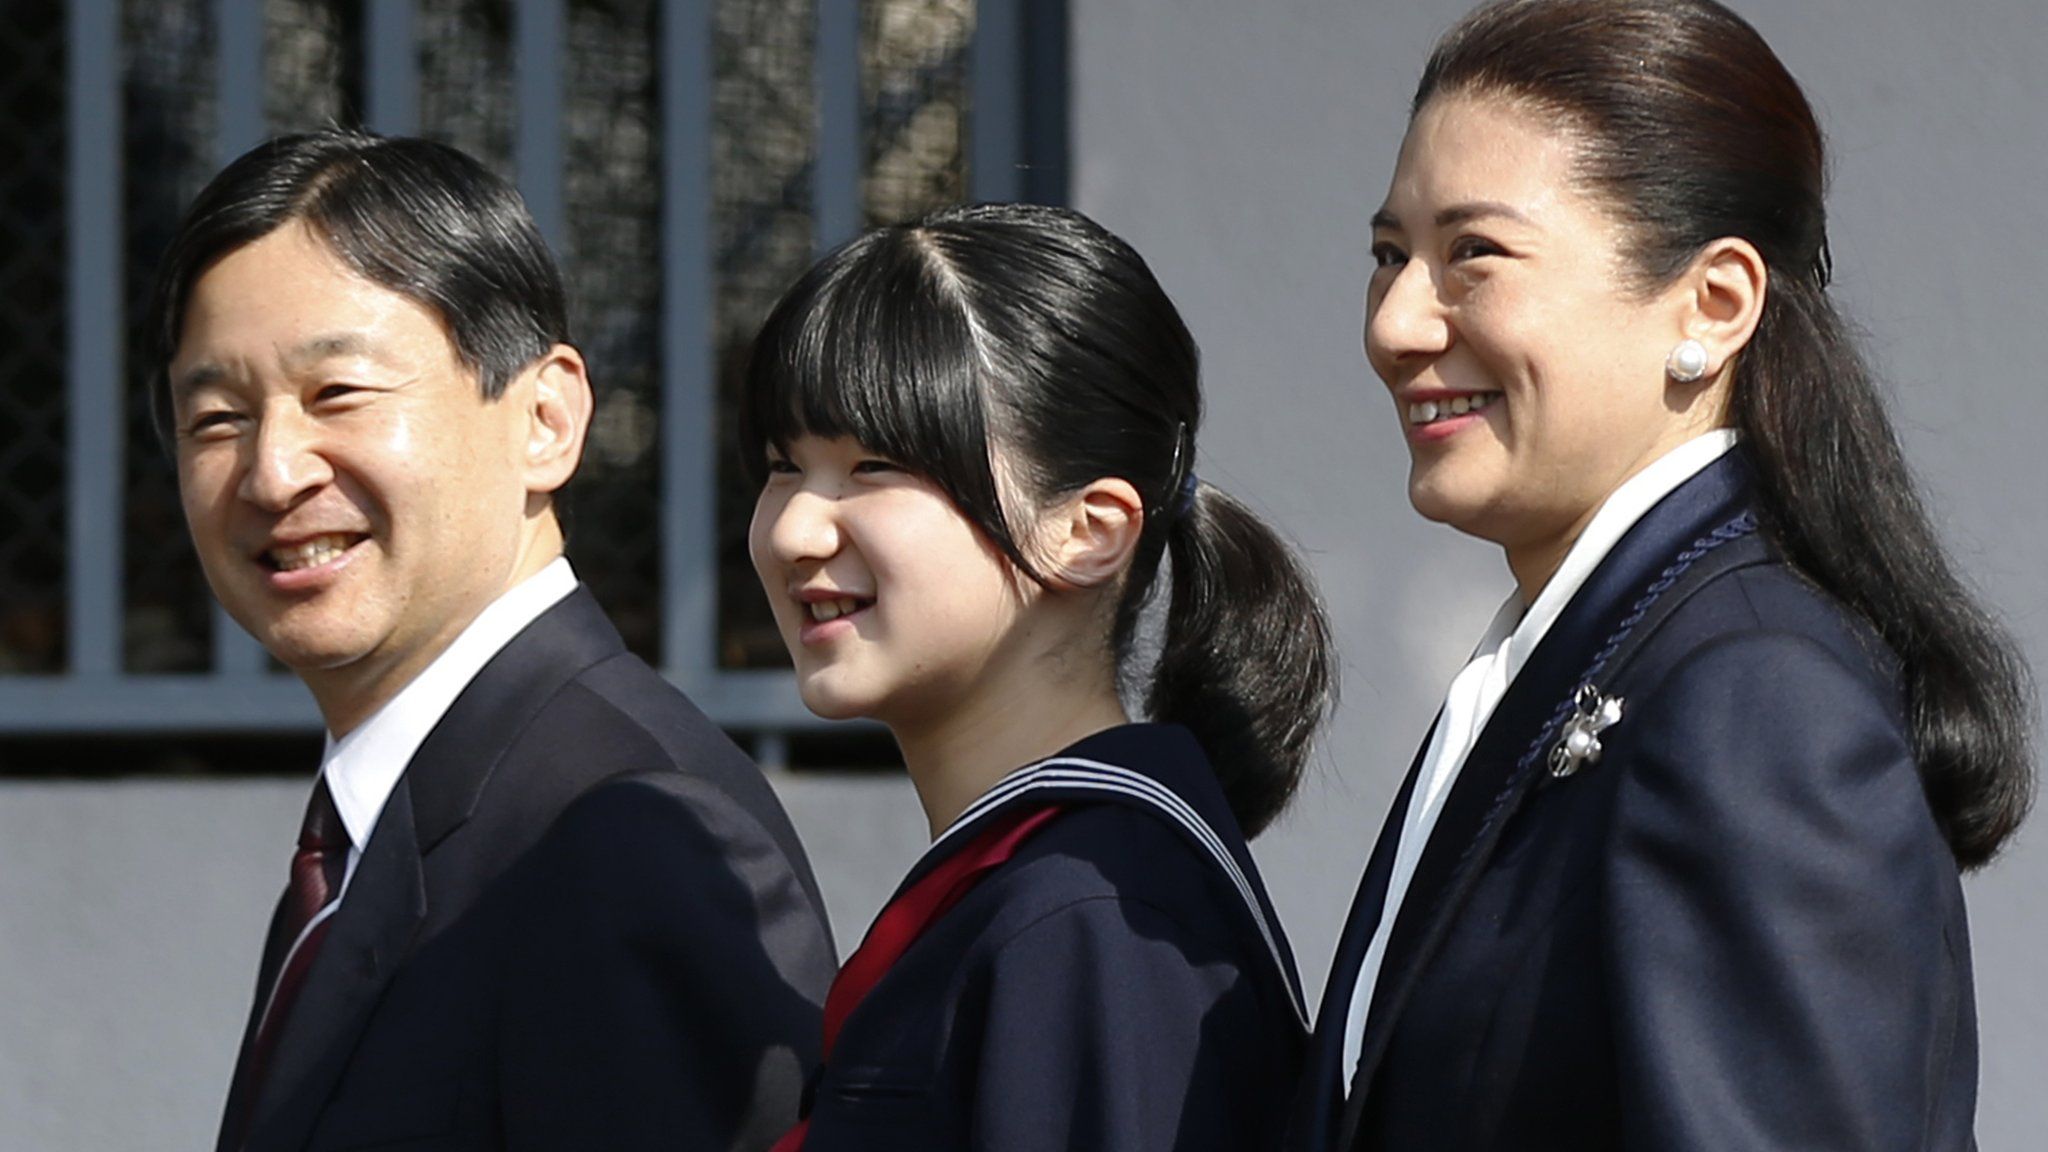 Japan's Princess Aiko (C) arrives with her parents Crown Prince Naruhito (L) and Crown Princess Masako to attend her graduation ceremony at the Gakushuin Primary School in Tokyo on 18 March 2014